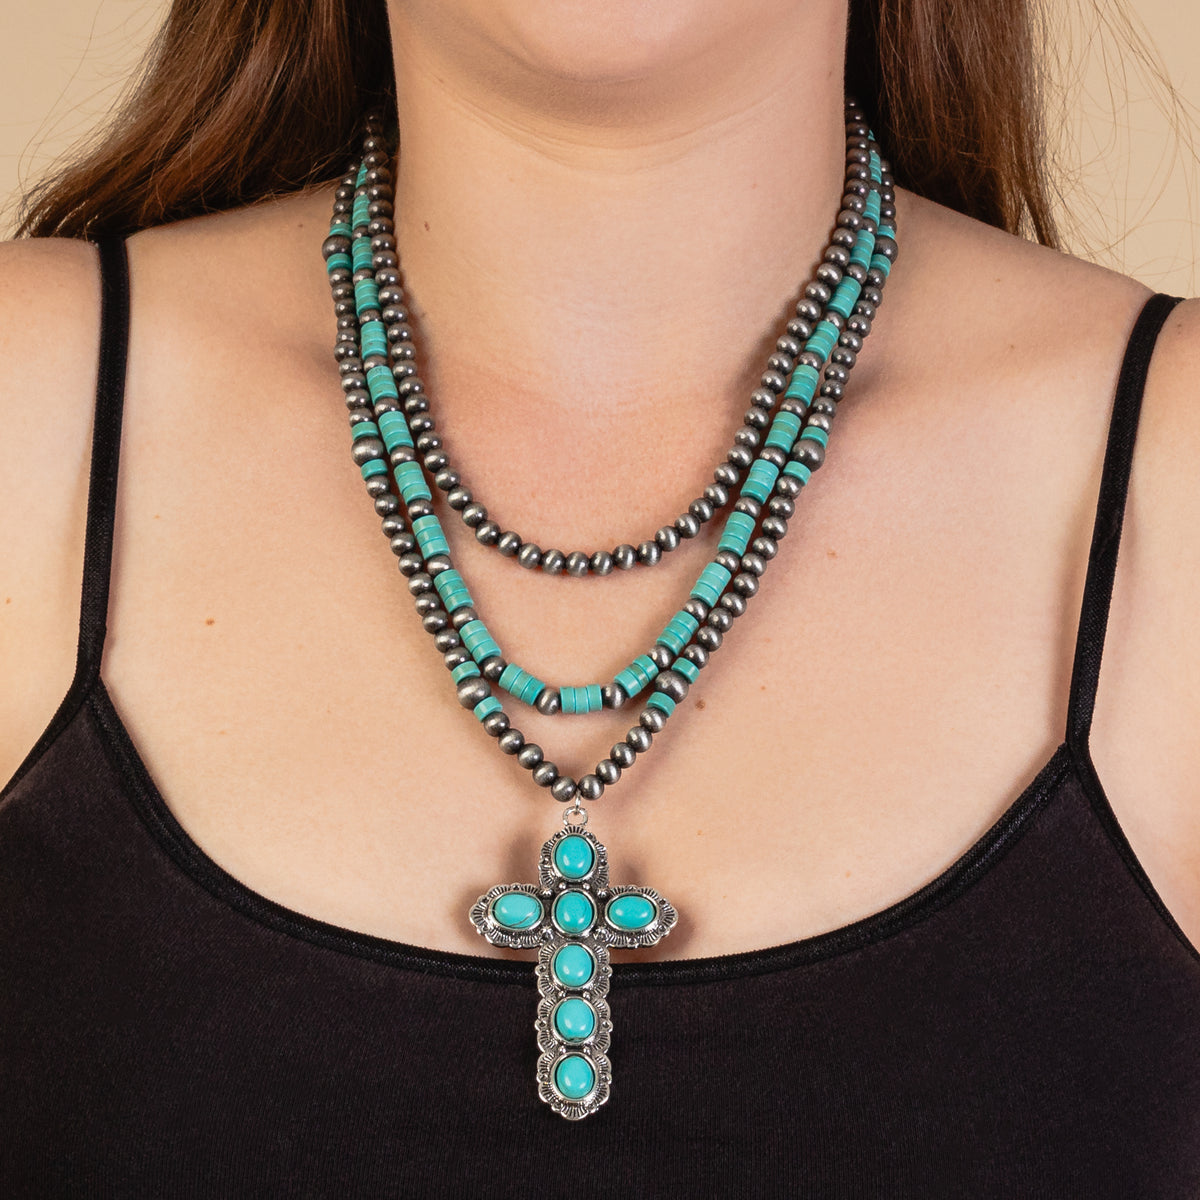 92026 - Layered Cross Necklace - Turquoise & Silver